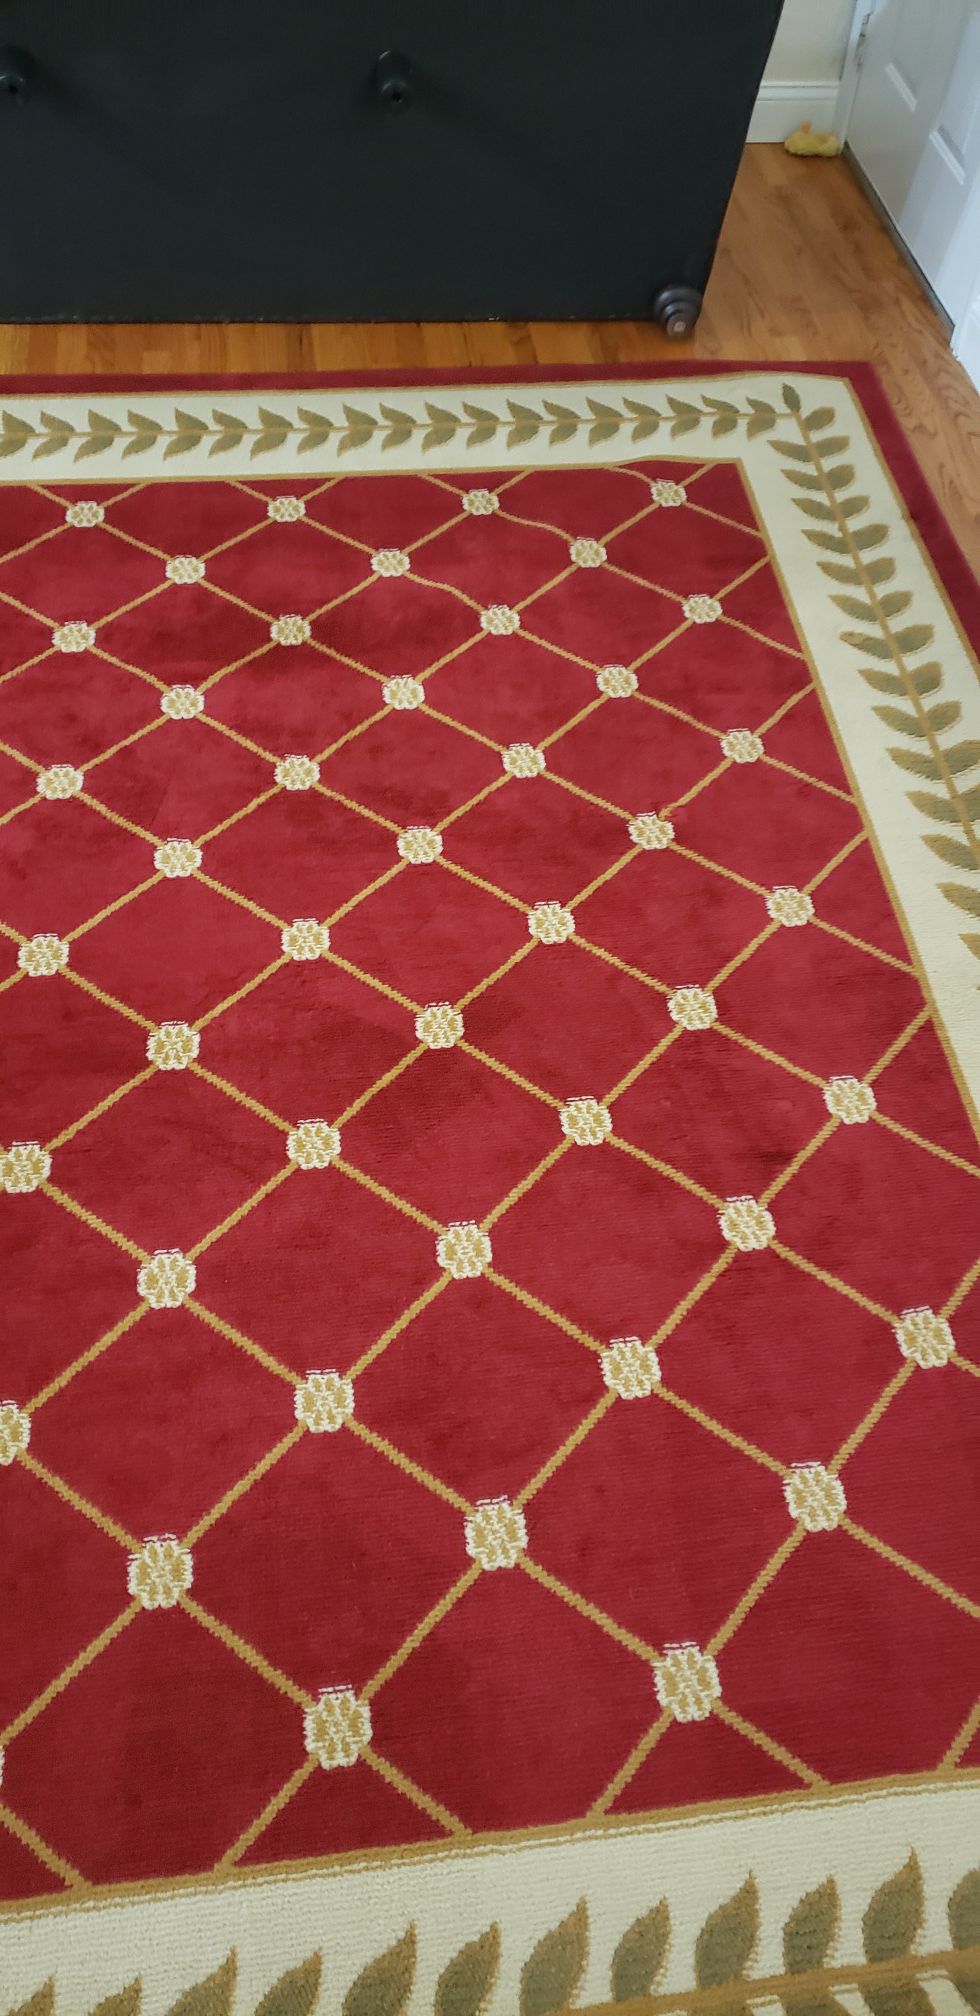 Red area rugs.